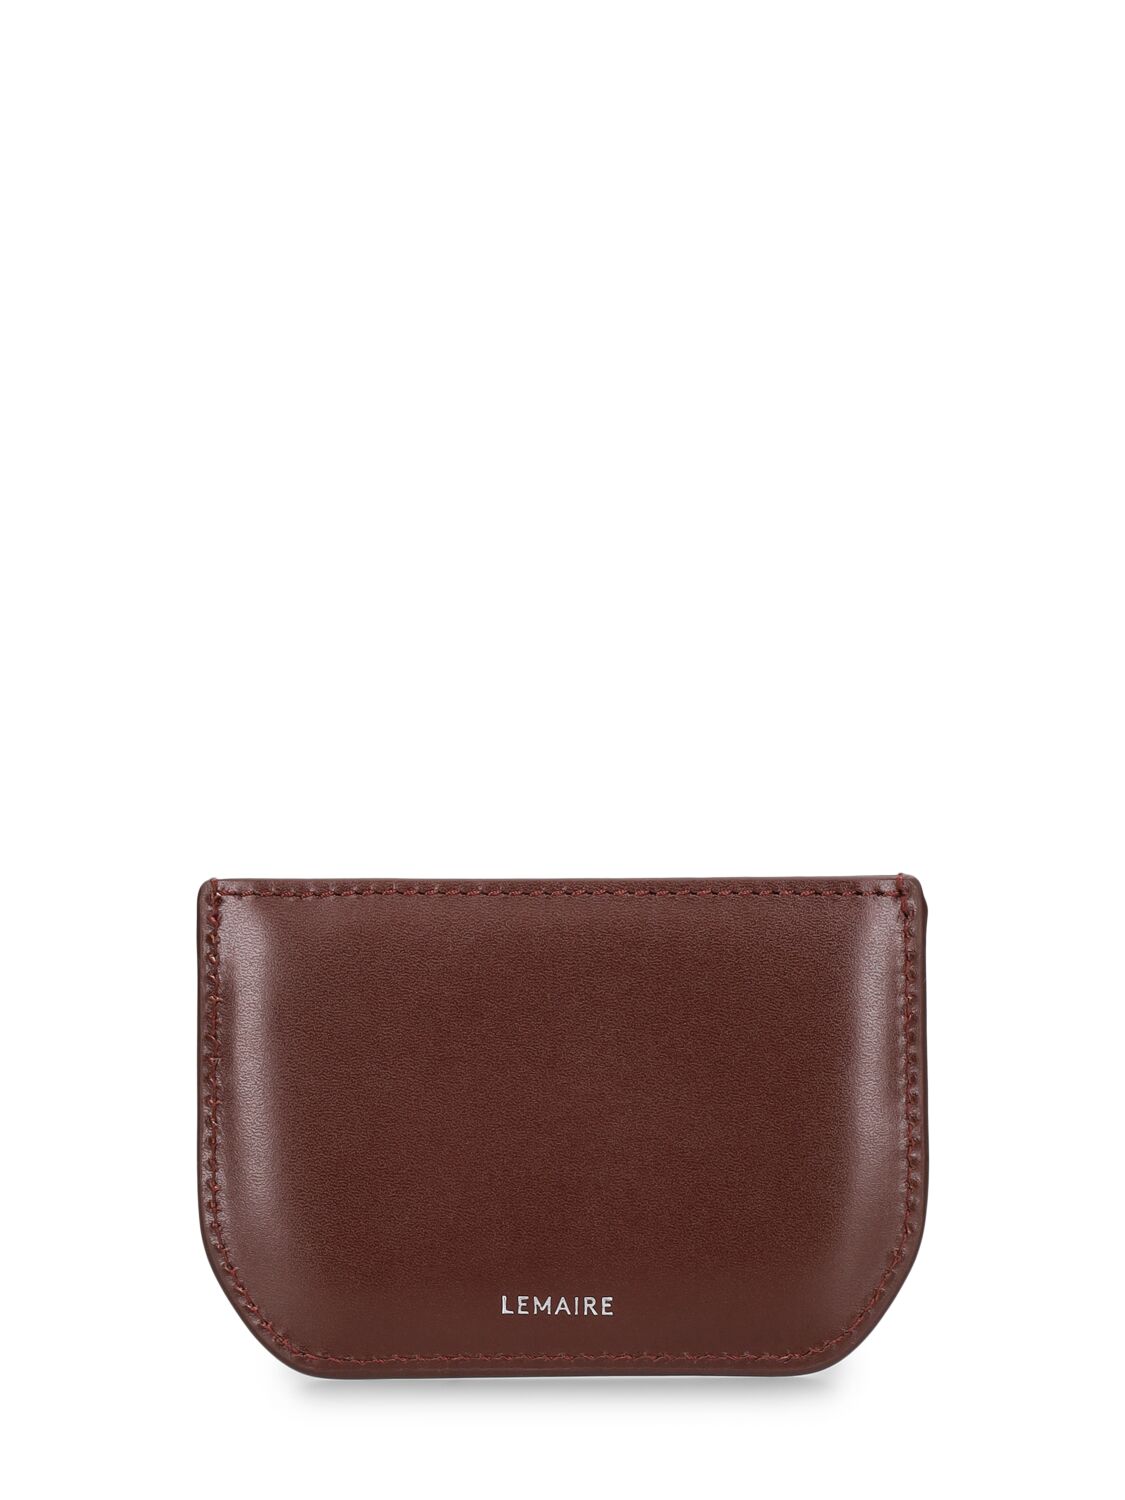 Lemaire Calepin Leather Card Holder In Choco Fondant